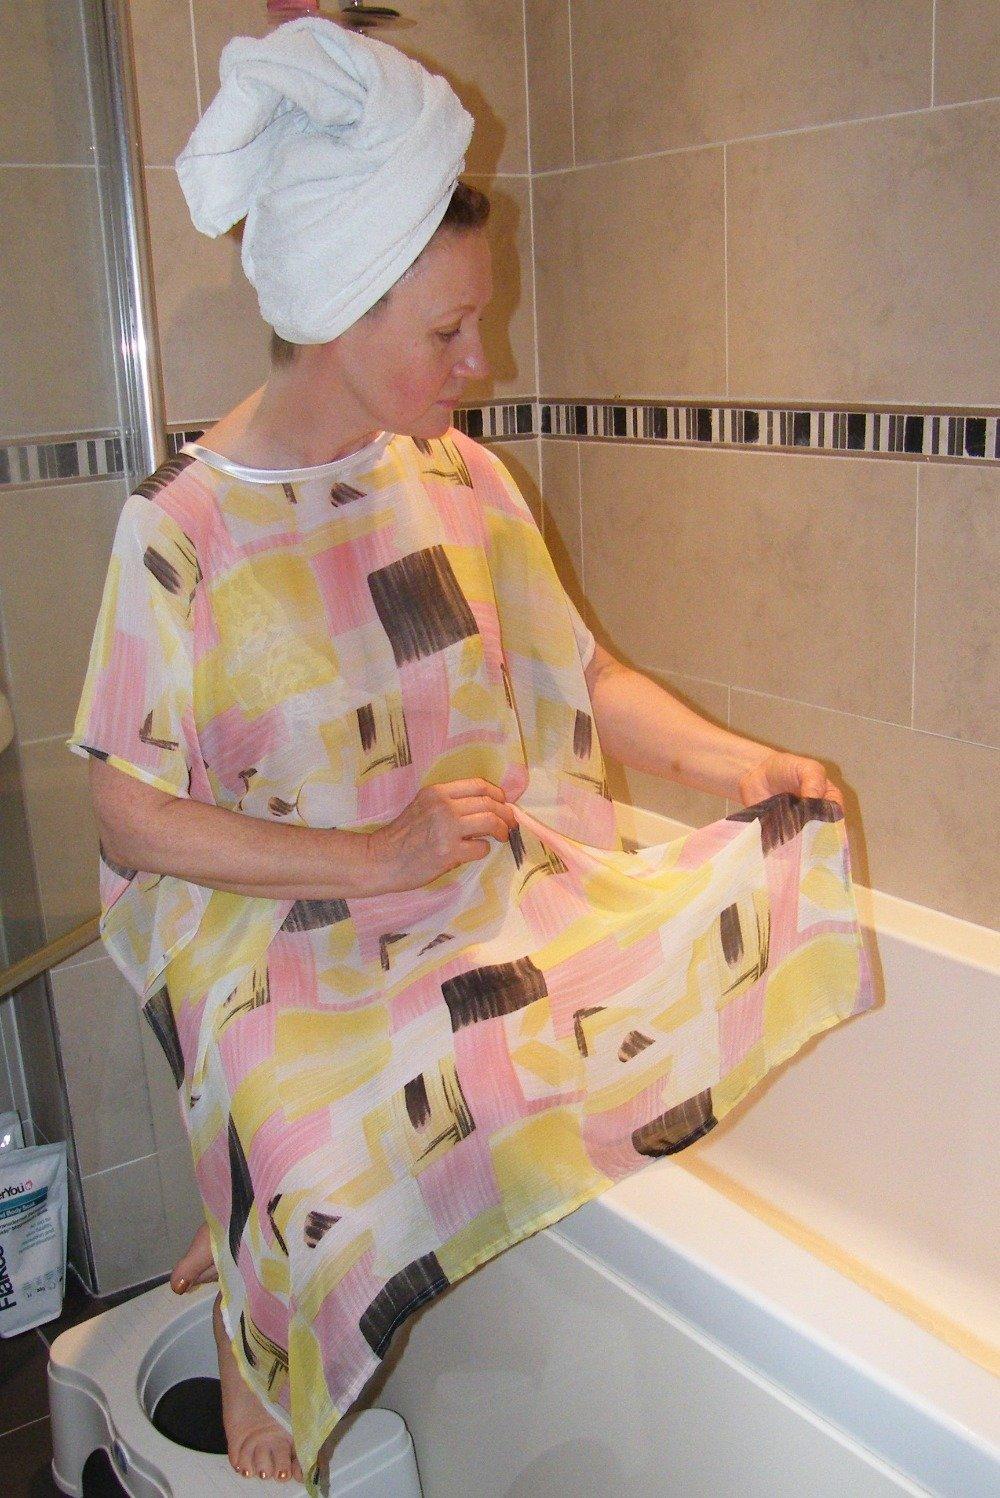 Modesty Bath wear and Modesty Shower wear Lemon/Pink NeverNaked(tm) Shower Drapron® provides dignity whilst being helped to shower